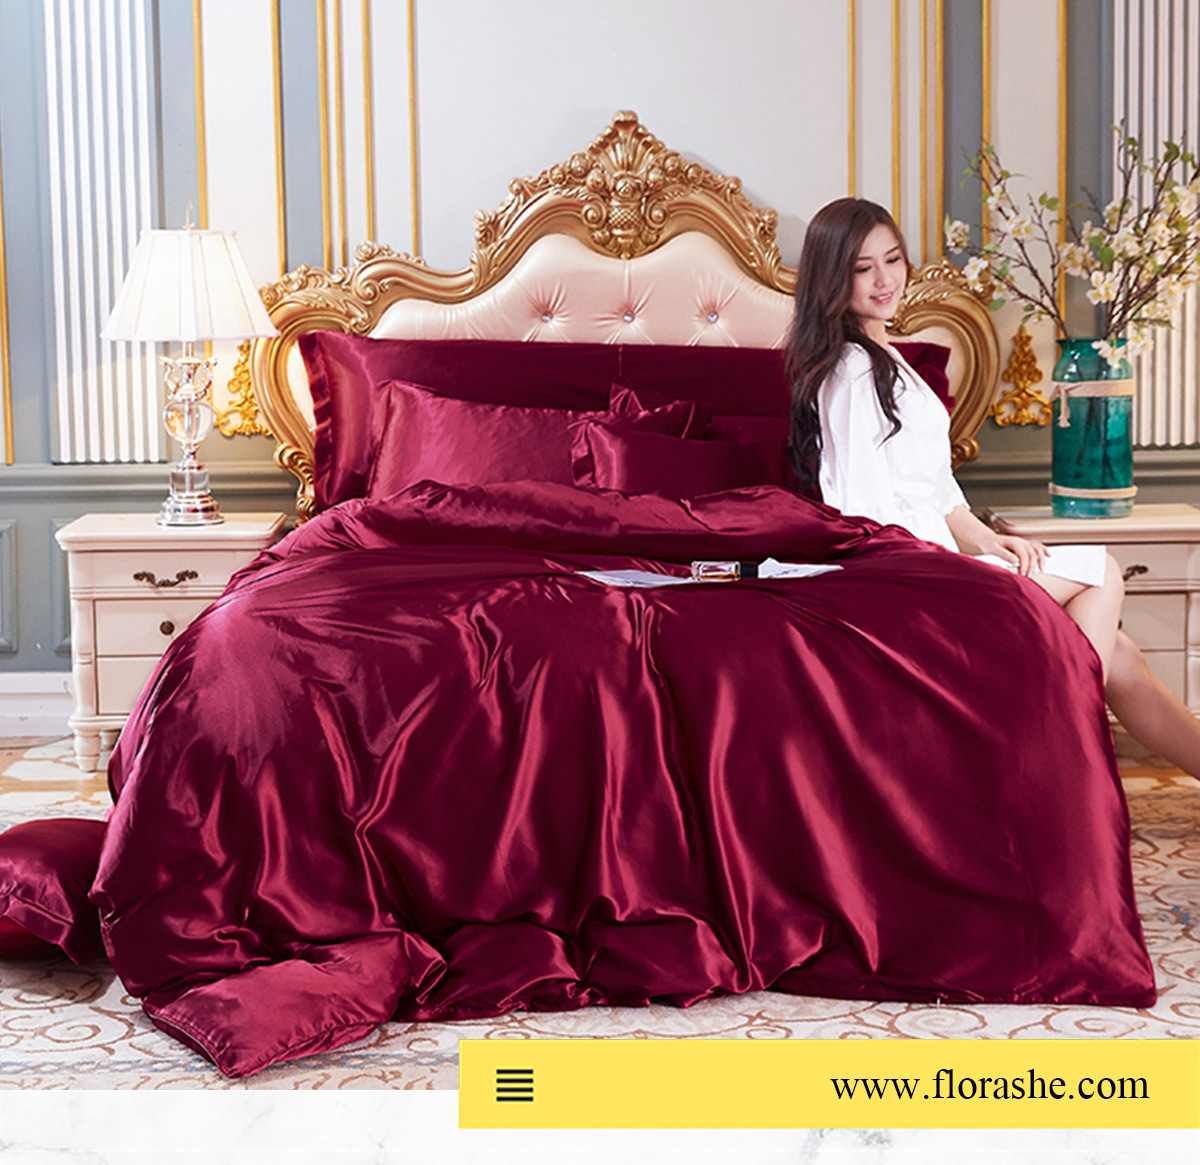 4-Piece-Soft-Silky-Satin-Solid-Color-Bed-Sheet-Pillowcases-Set23.jpg